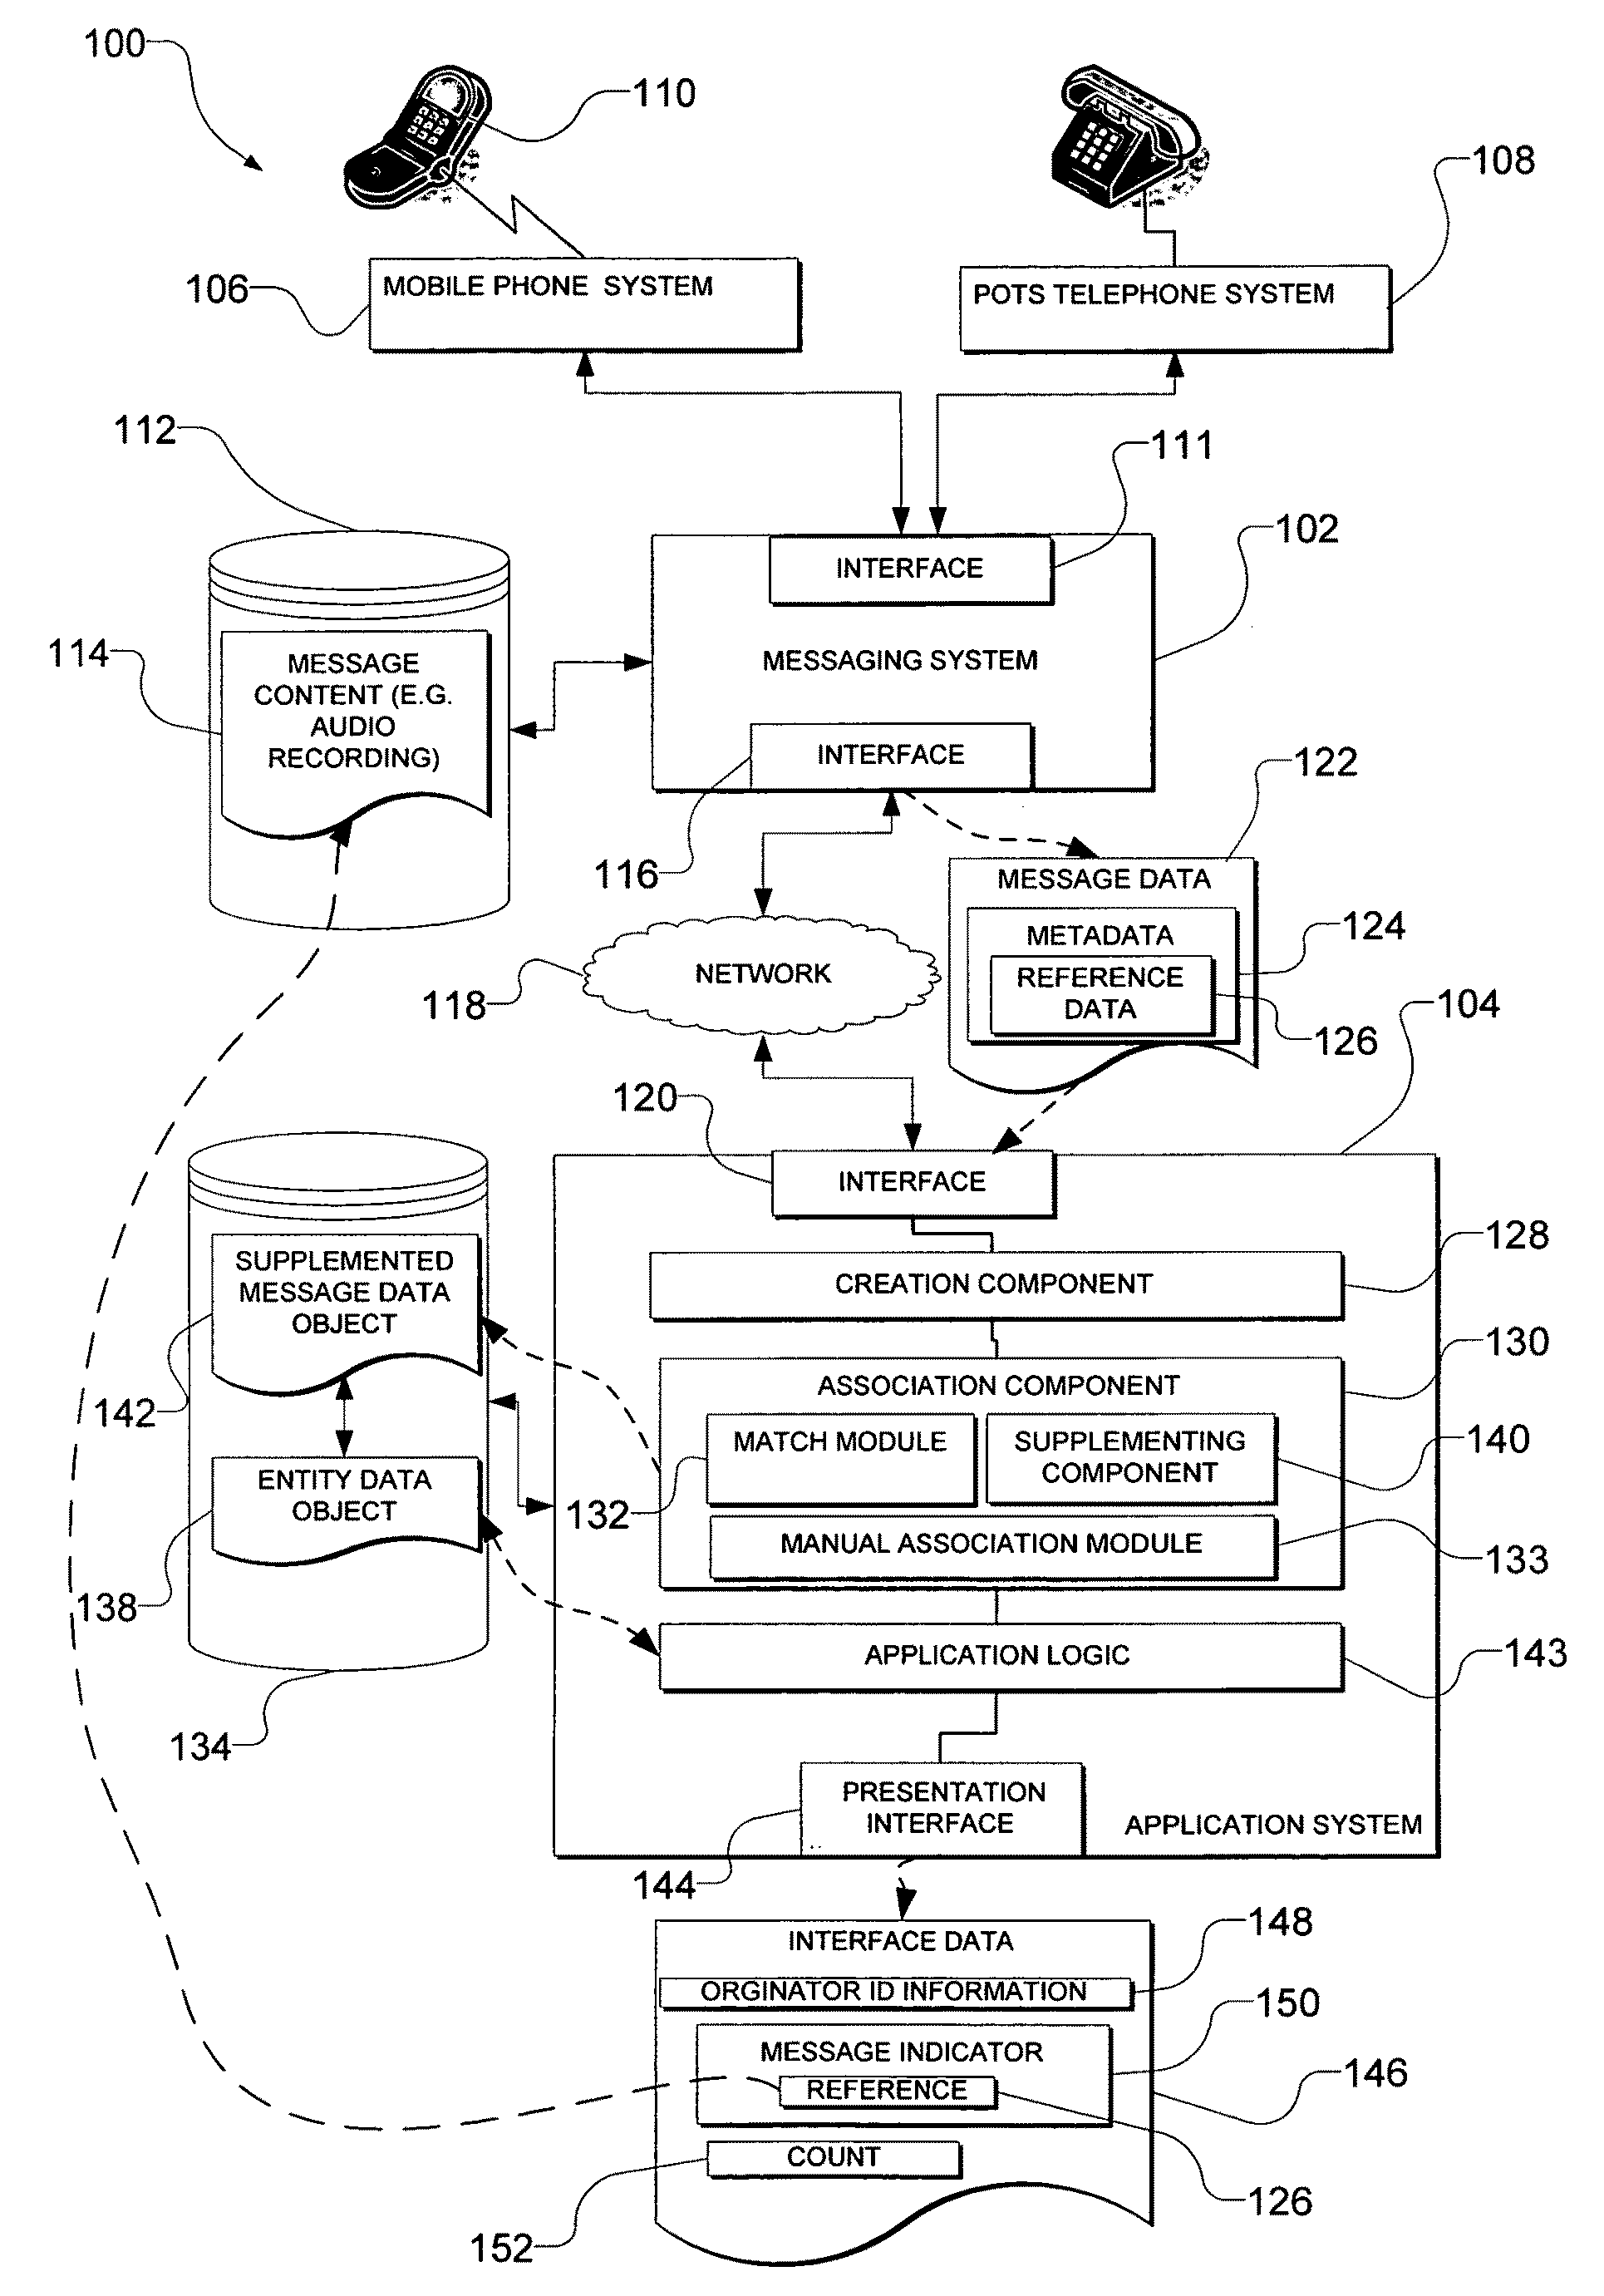 Messaging and application system integration